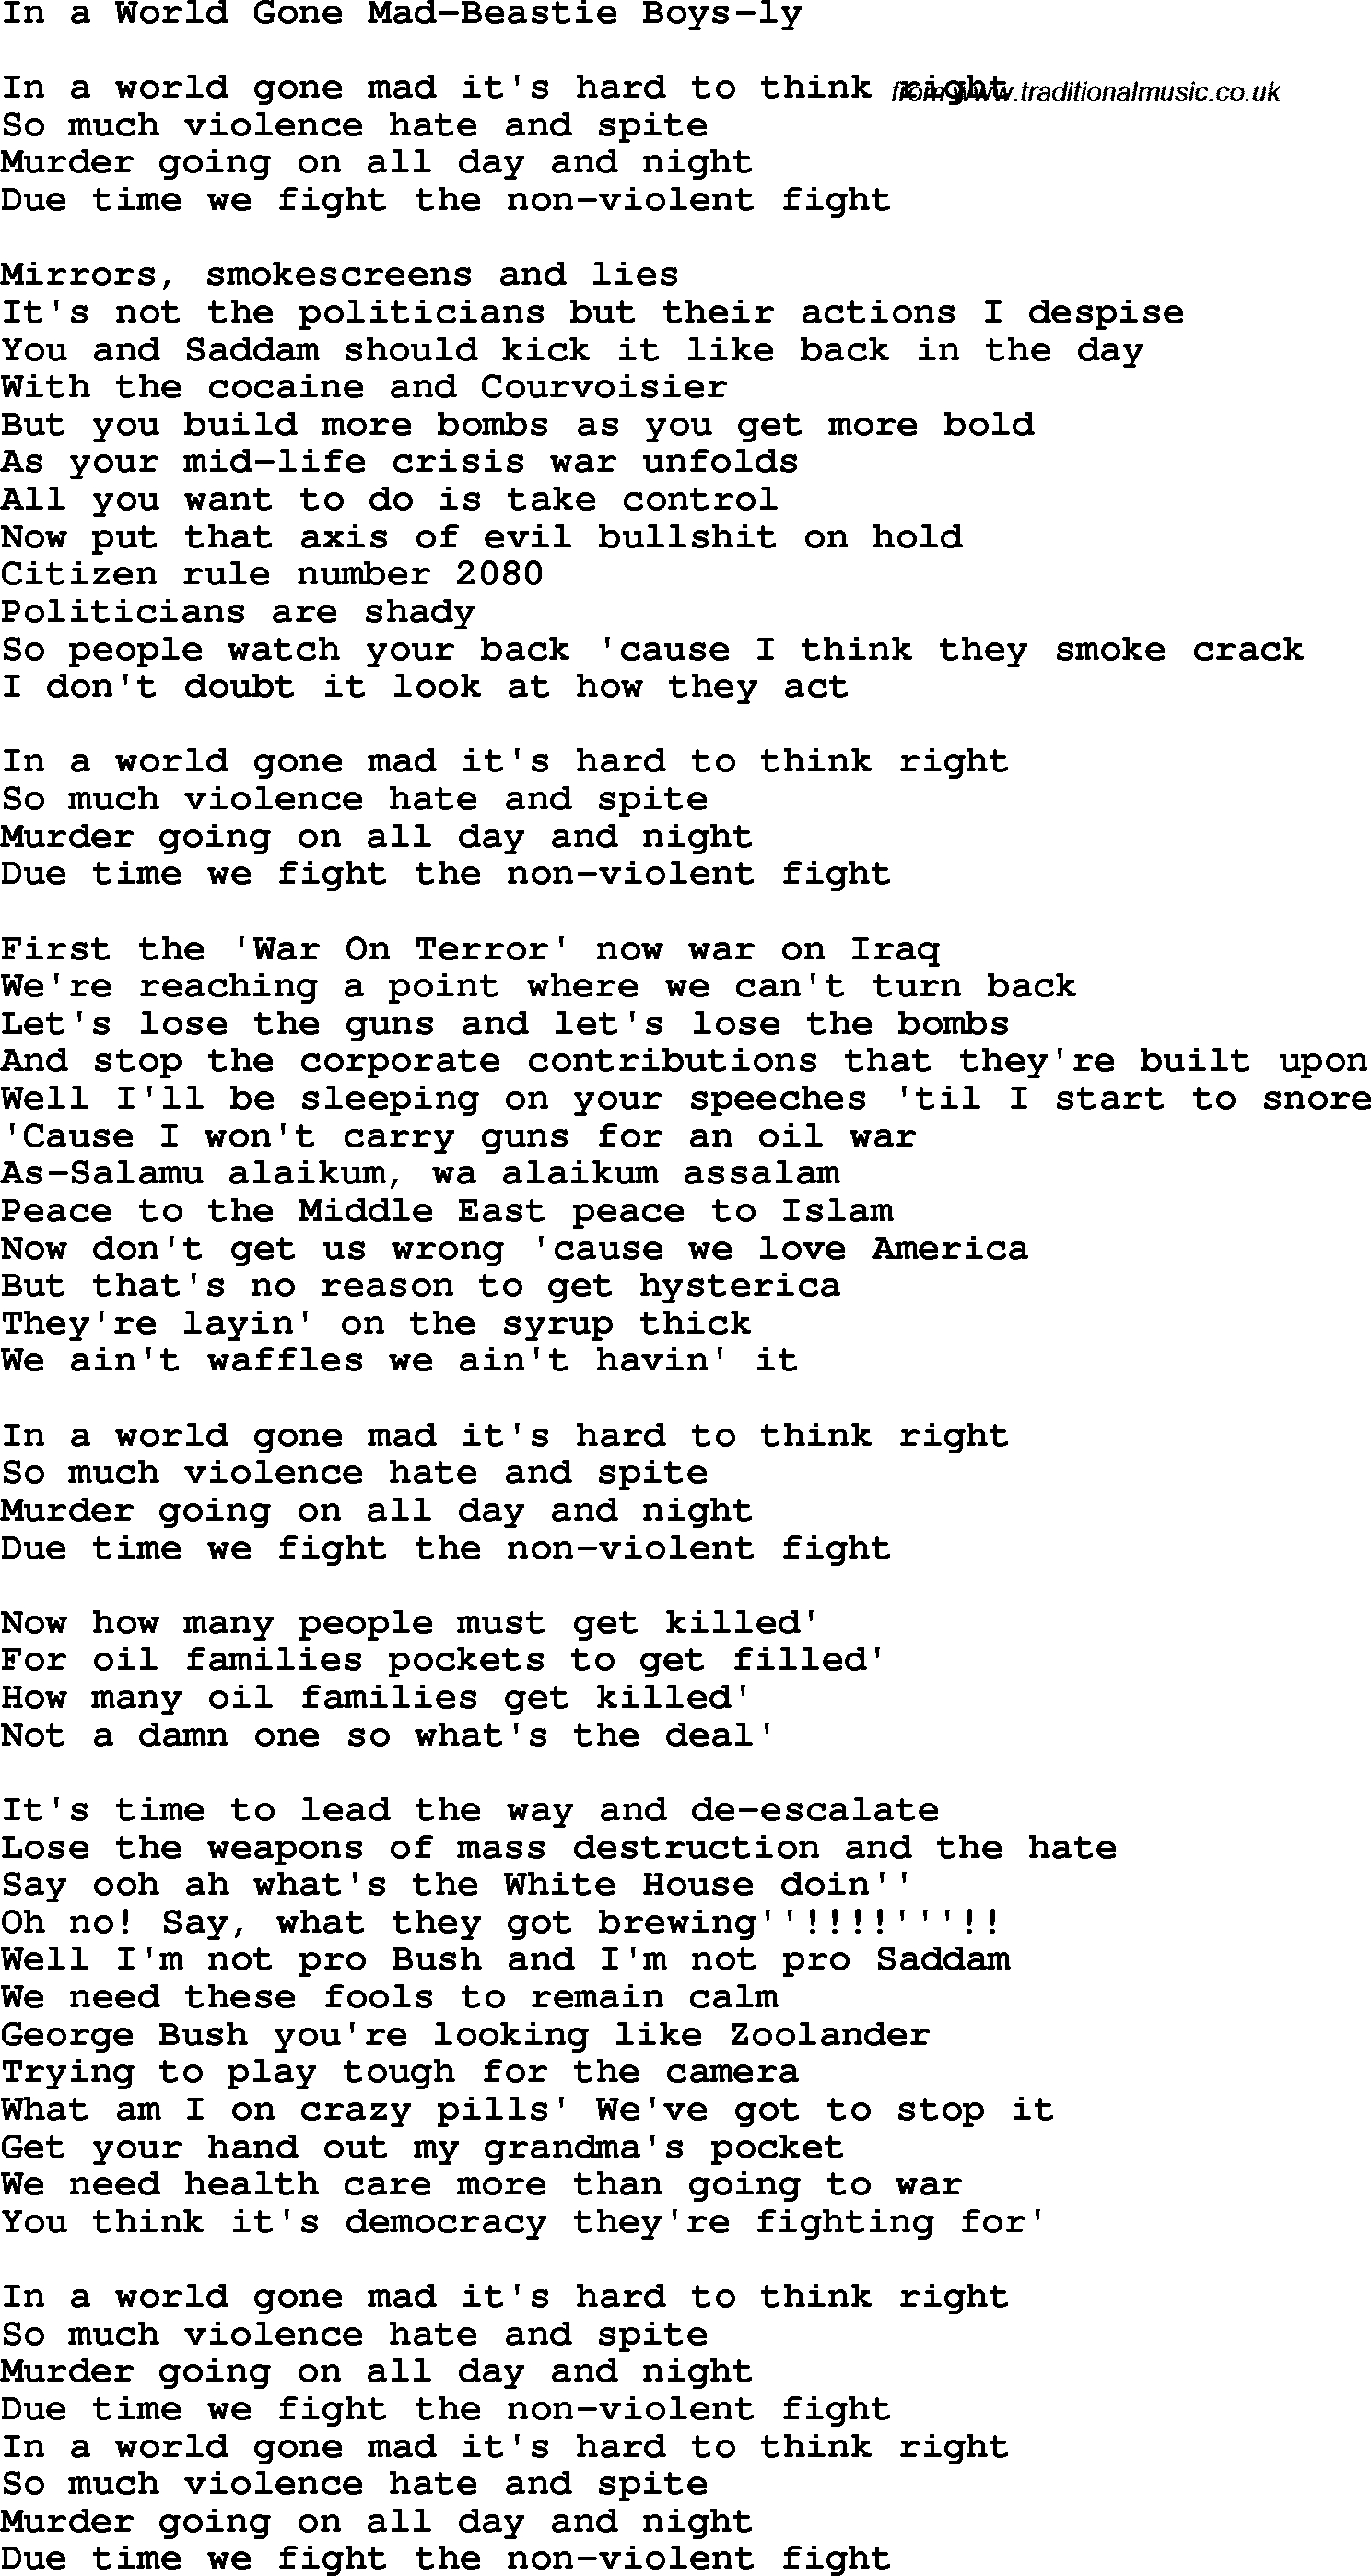 Mad World Chords Protest Song In A World Gone Mad Beastie Boys Lyrics And Chords